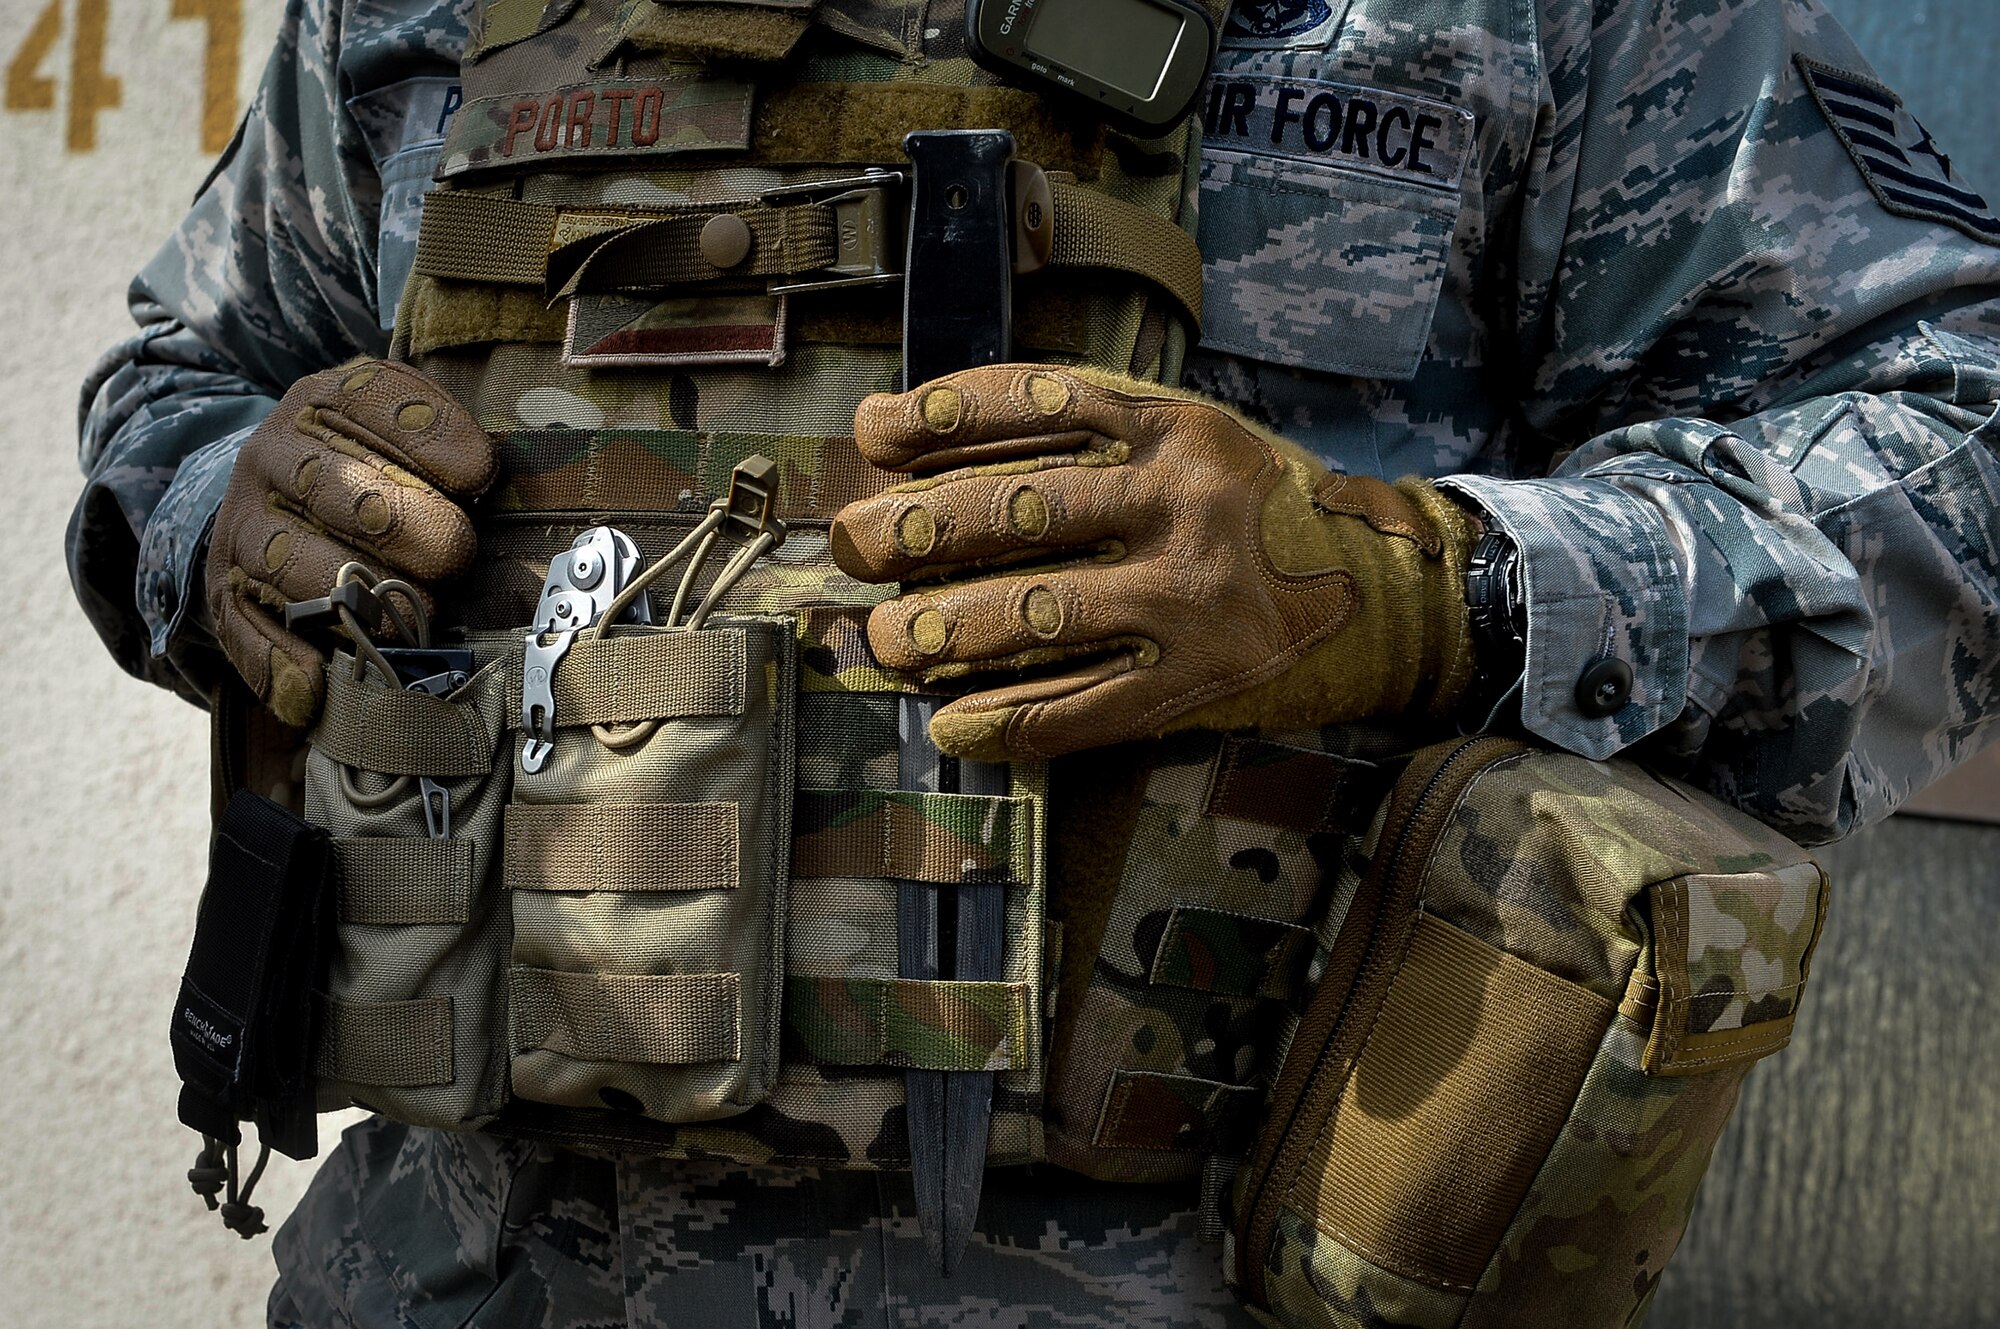 Tech. Sgt. Ricardo Porto, 786th Civil Engineer Squadron explosive ordnance disposal craftsman, rests his hands over his protective vest during an exercise on Ramstein Air Base, Germany, March 23, 2017. Exercise Silver Flag involves Airmen from a variety of career fields, and is conducted year-round by the 435th Contingency Response Group. In 2017, EOD returned for the first time in nine years to the Silver Flag curriculum on Ramstein. (U.S. Air Force photo by Airman 1st Class Joshua Magbanua)